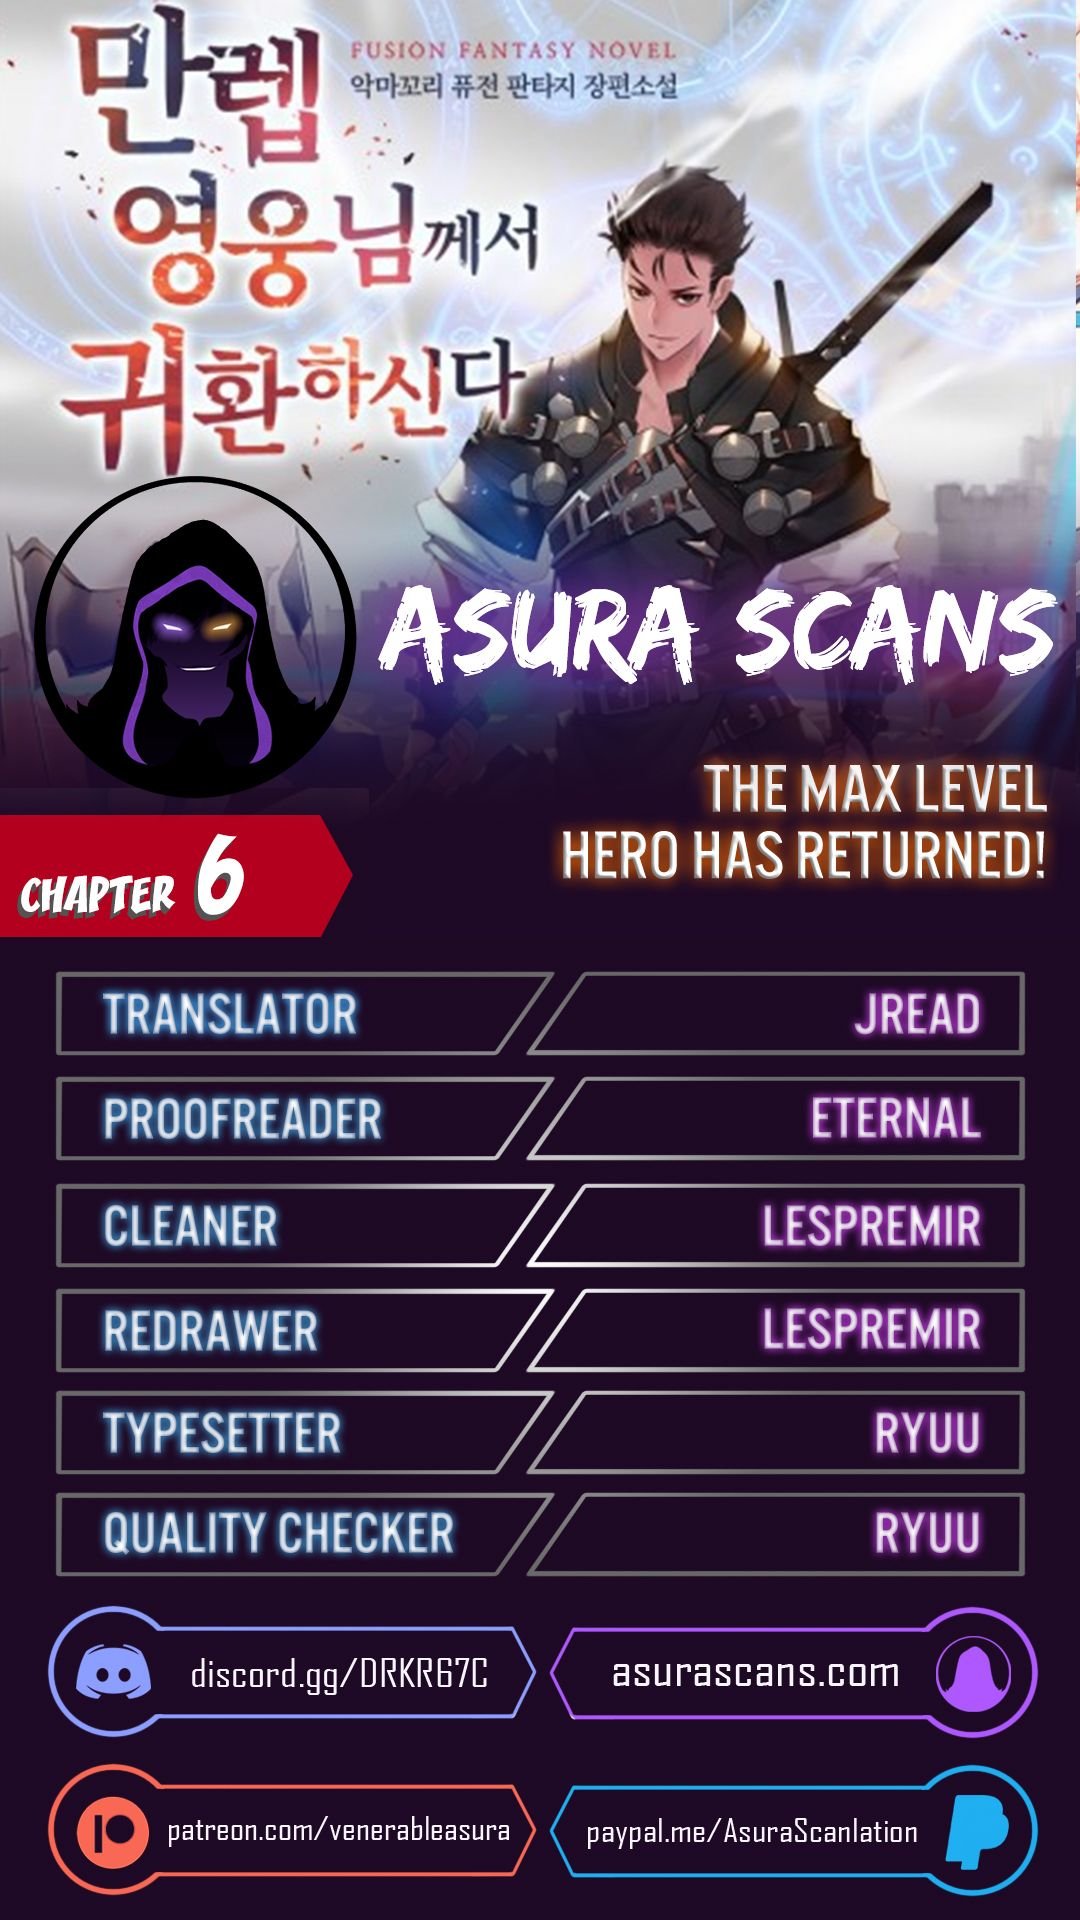 The MAX leveled hero will return! Chapter 6